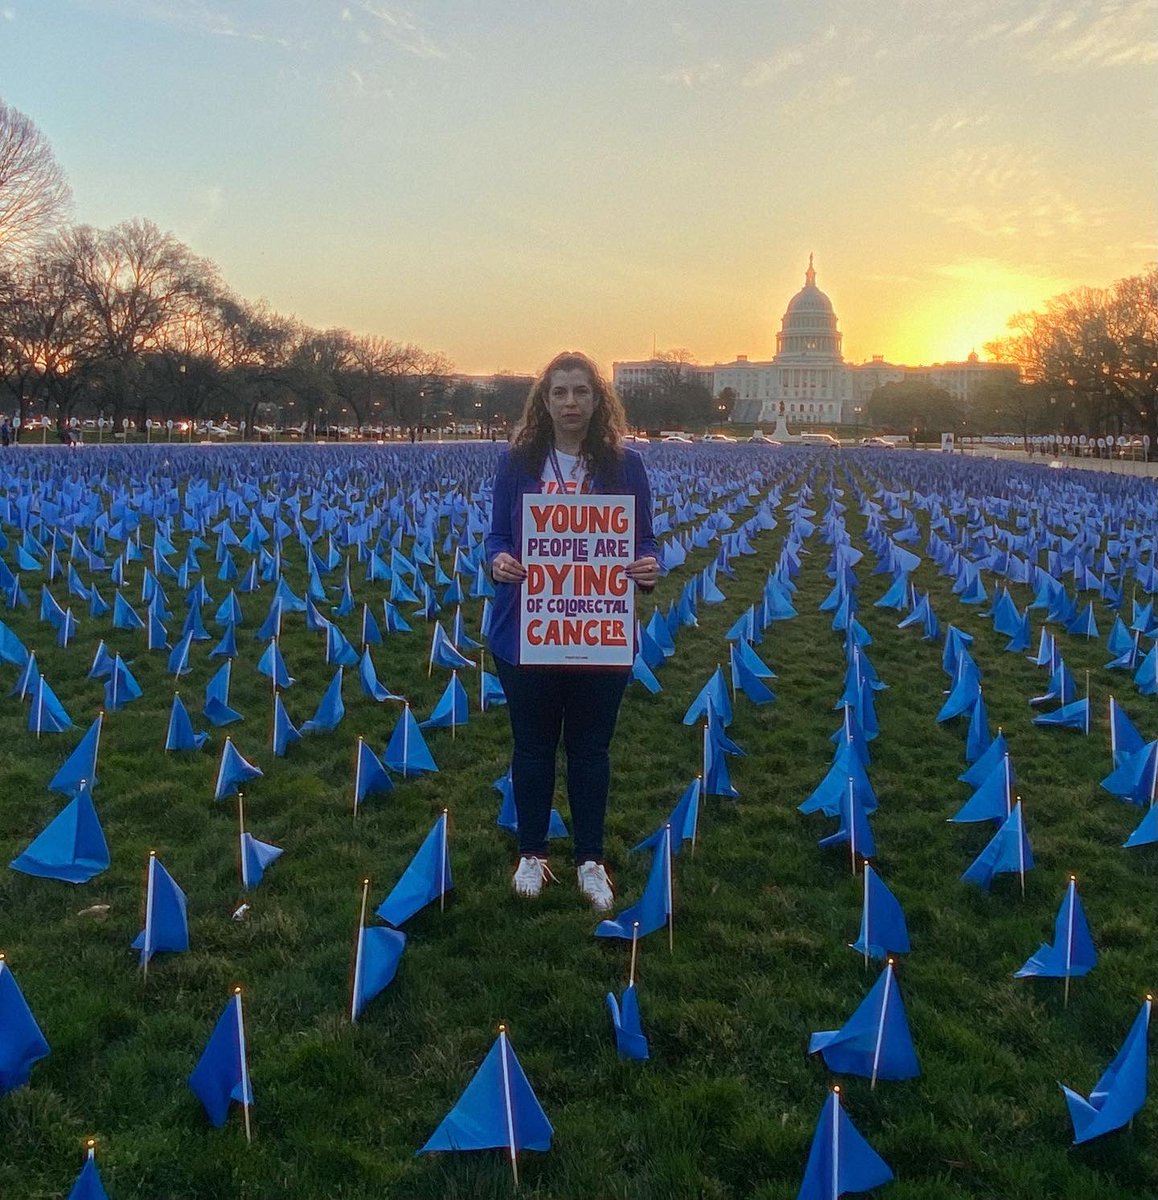 This flag installation represents our community’s desire for more research, treatment options, funding, & more lives saved. The installation is a visual representation of more than 27,400 people under the age of 50 projected to be diagnosed with #colorectalcancer in 2030.#crcsm